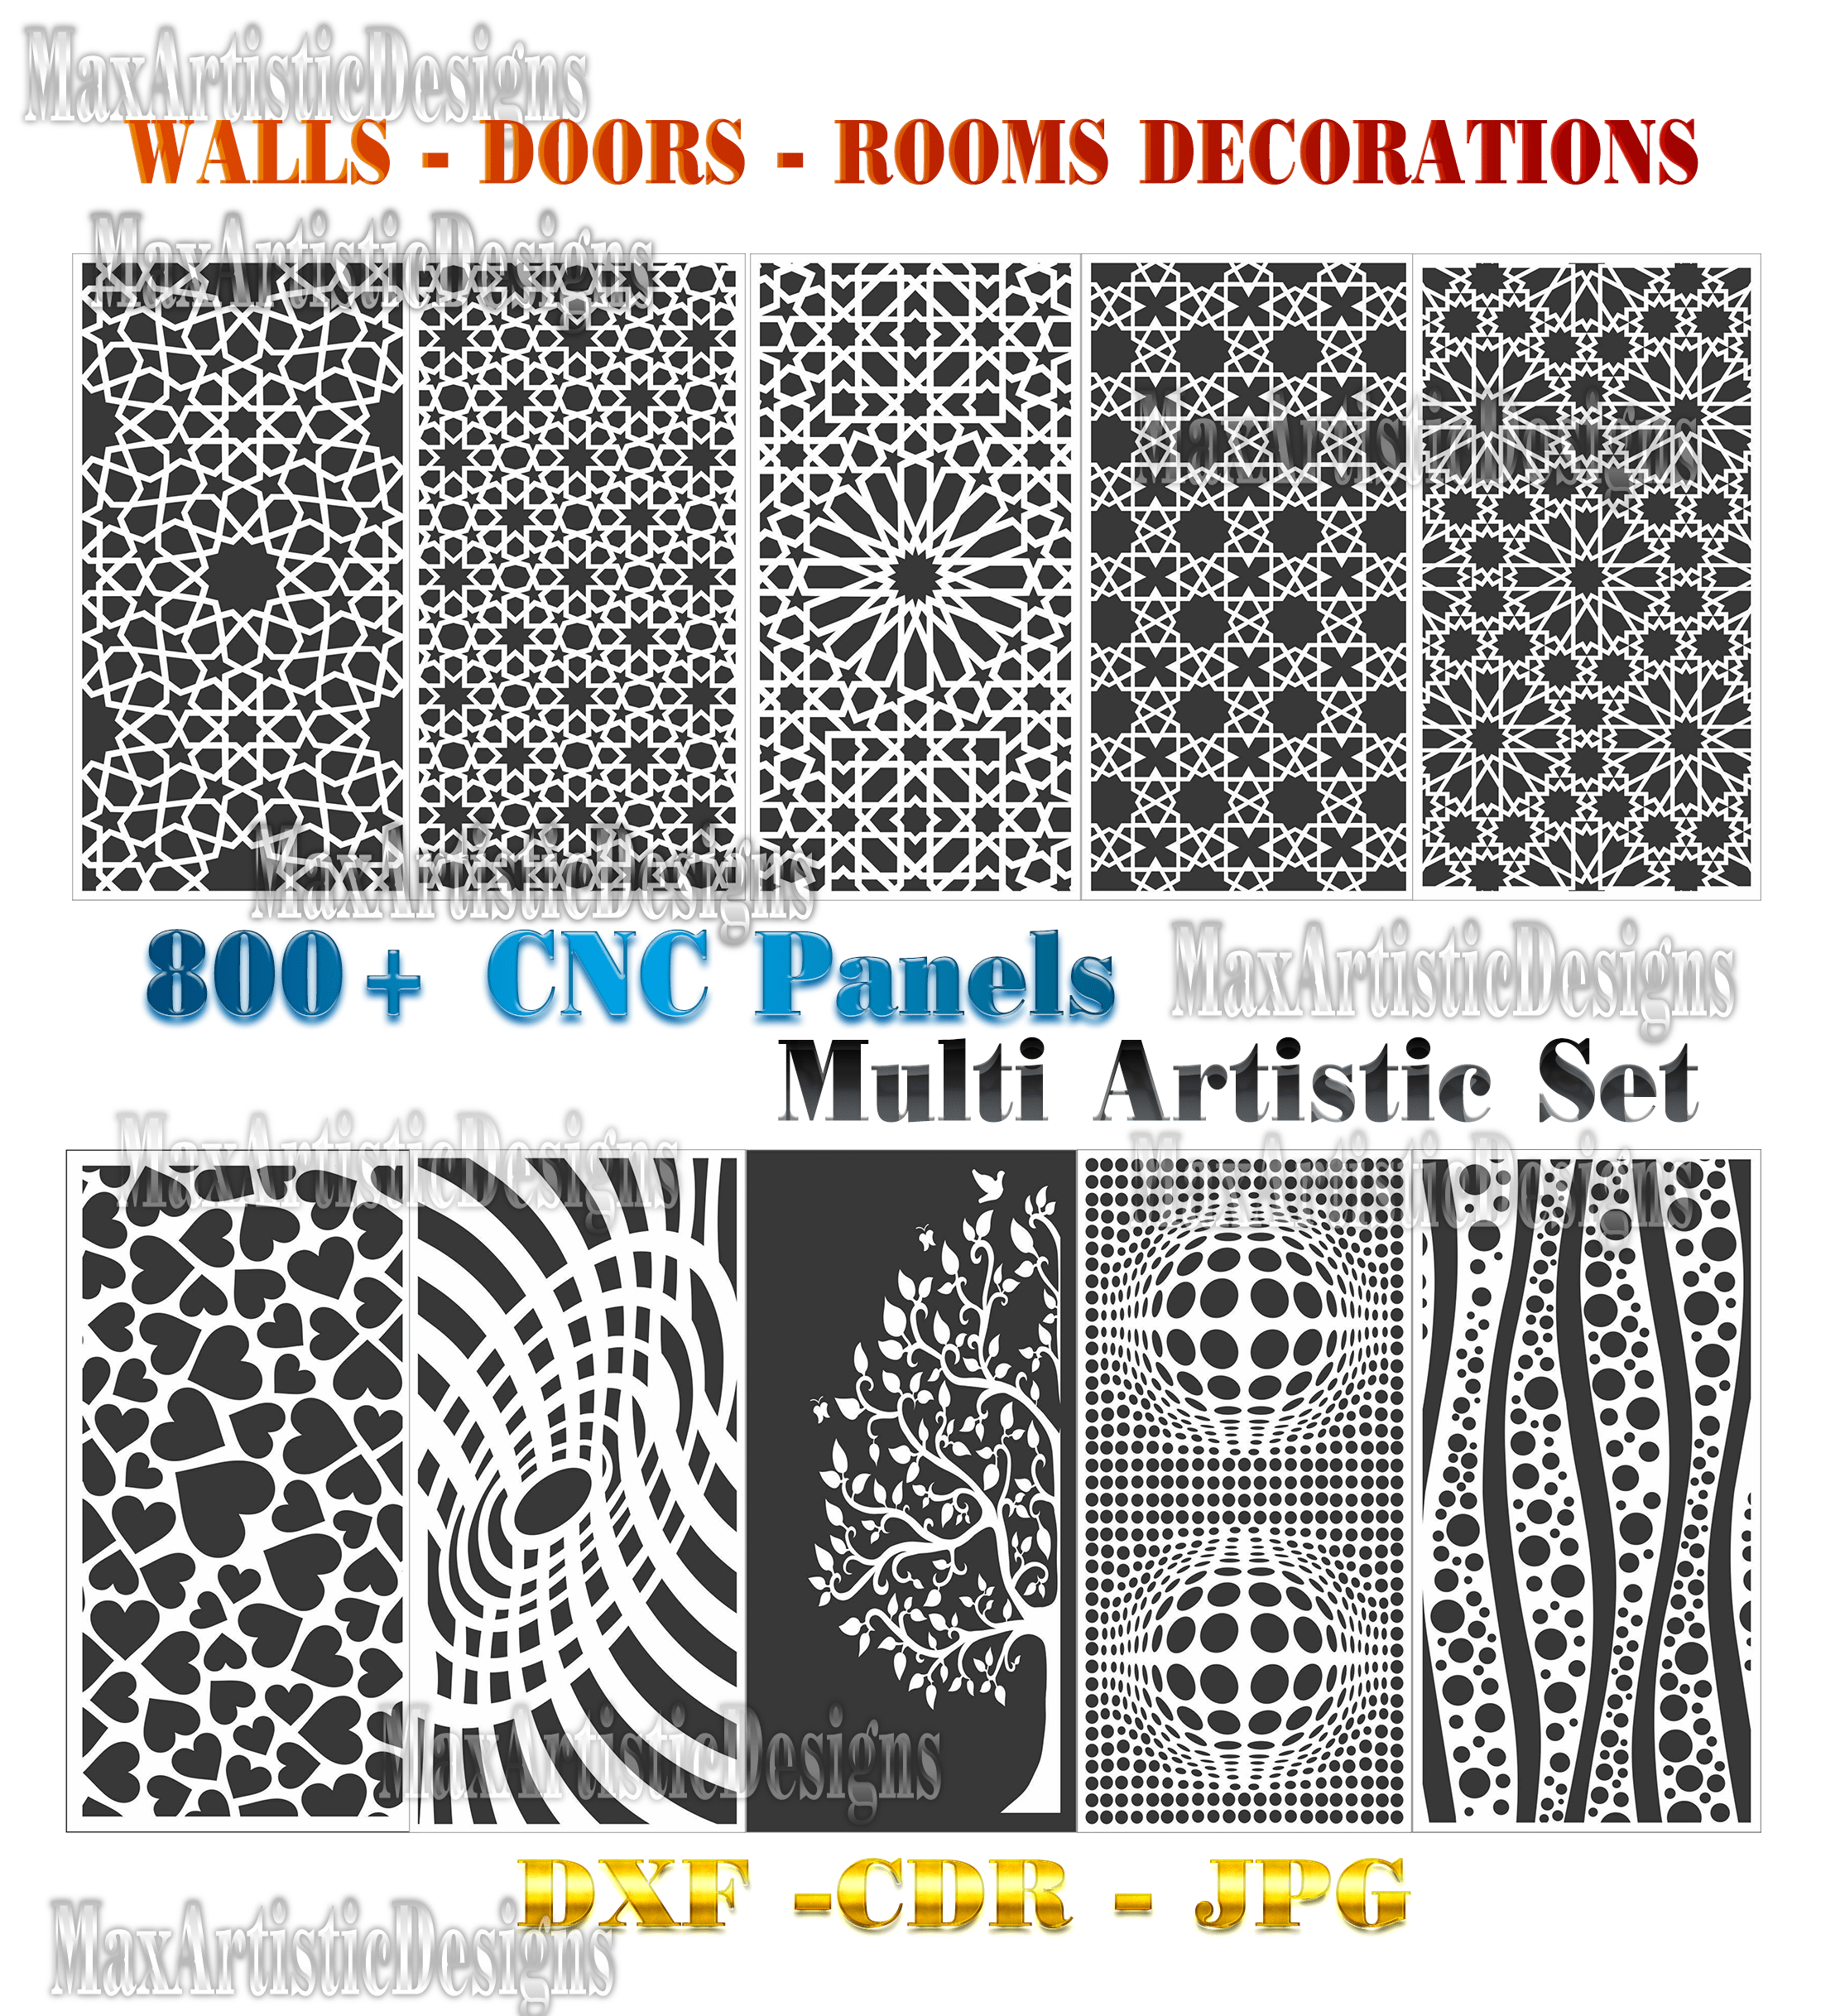 800+ dxf cdr deco panels file ready for cnc laser plasma, water jet, plasma router download